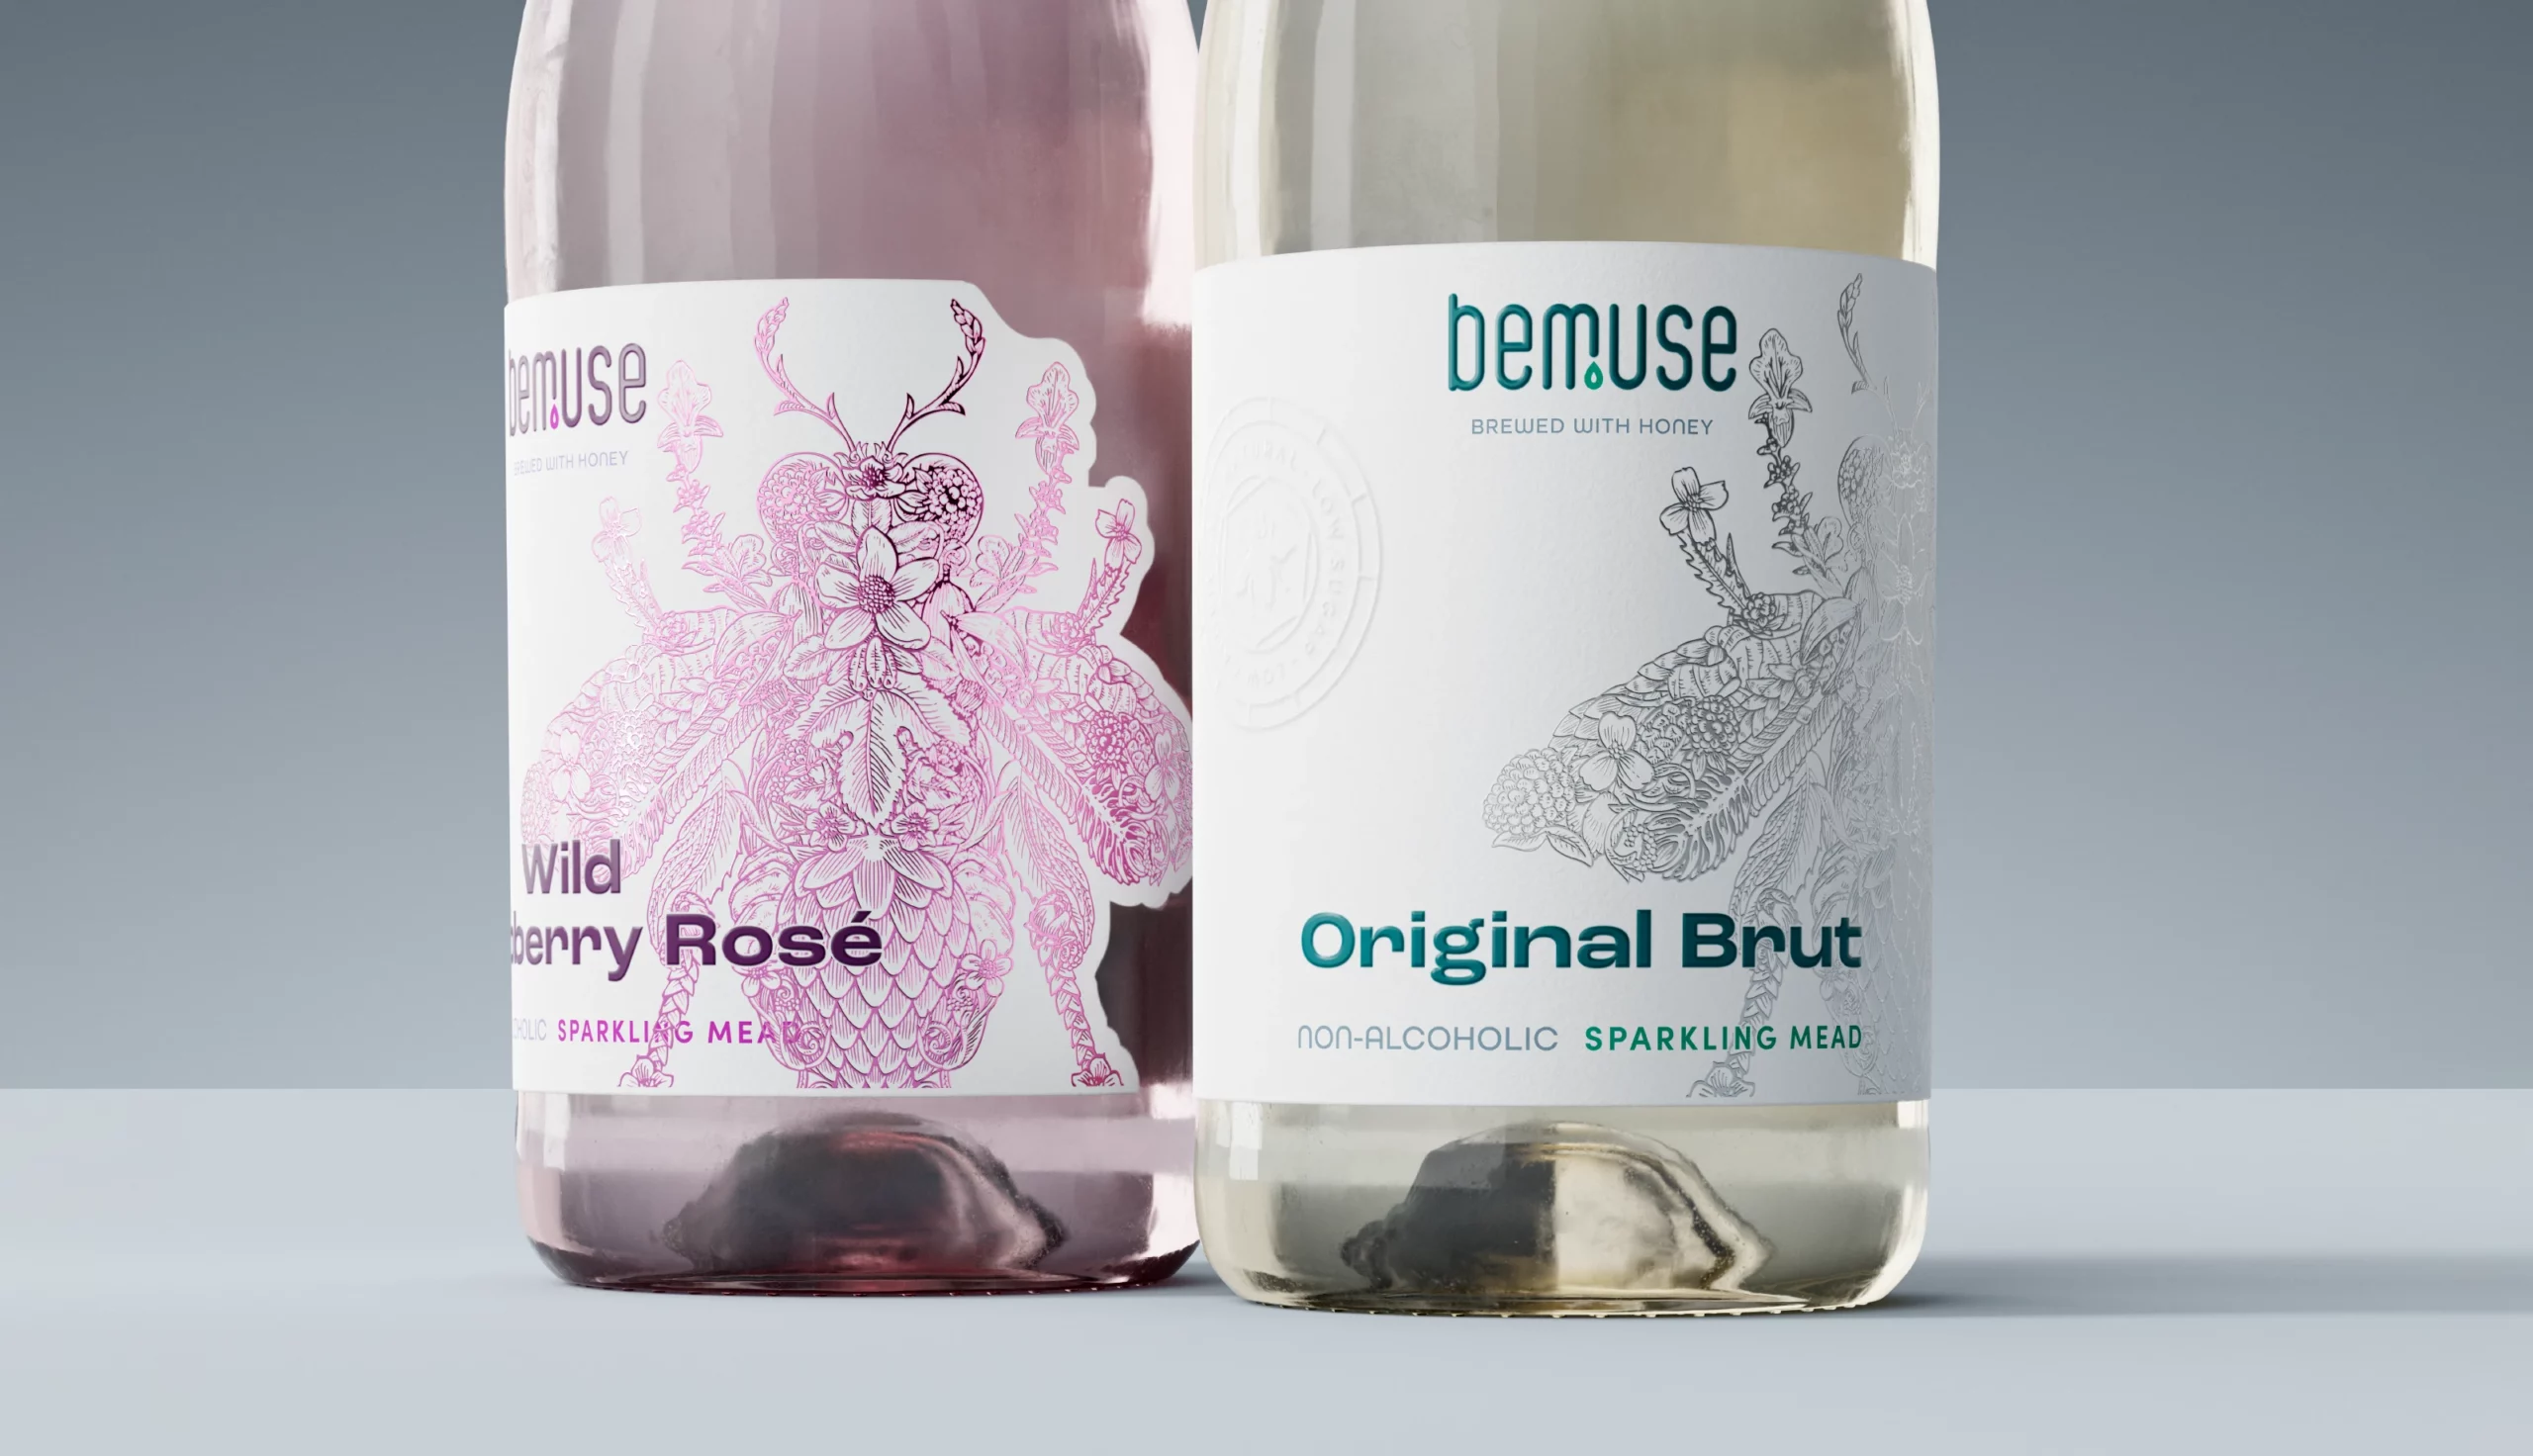 Bemuse close up of non alcoholic mead bottles